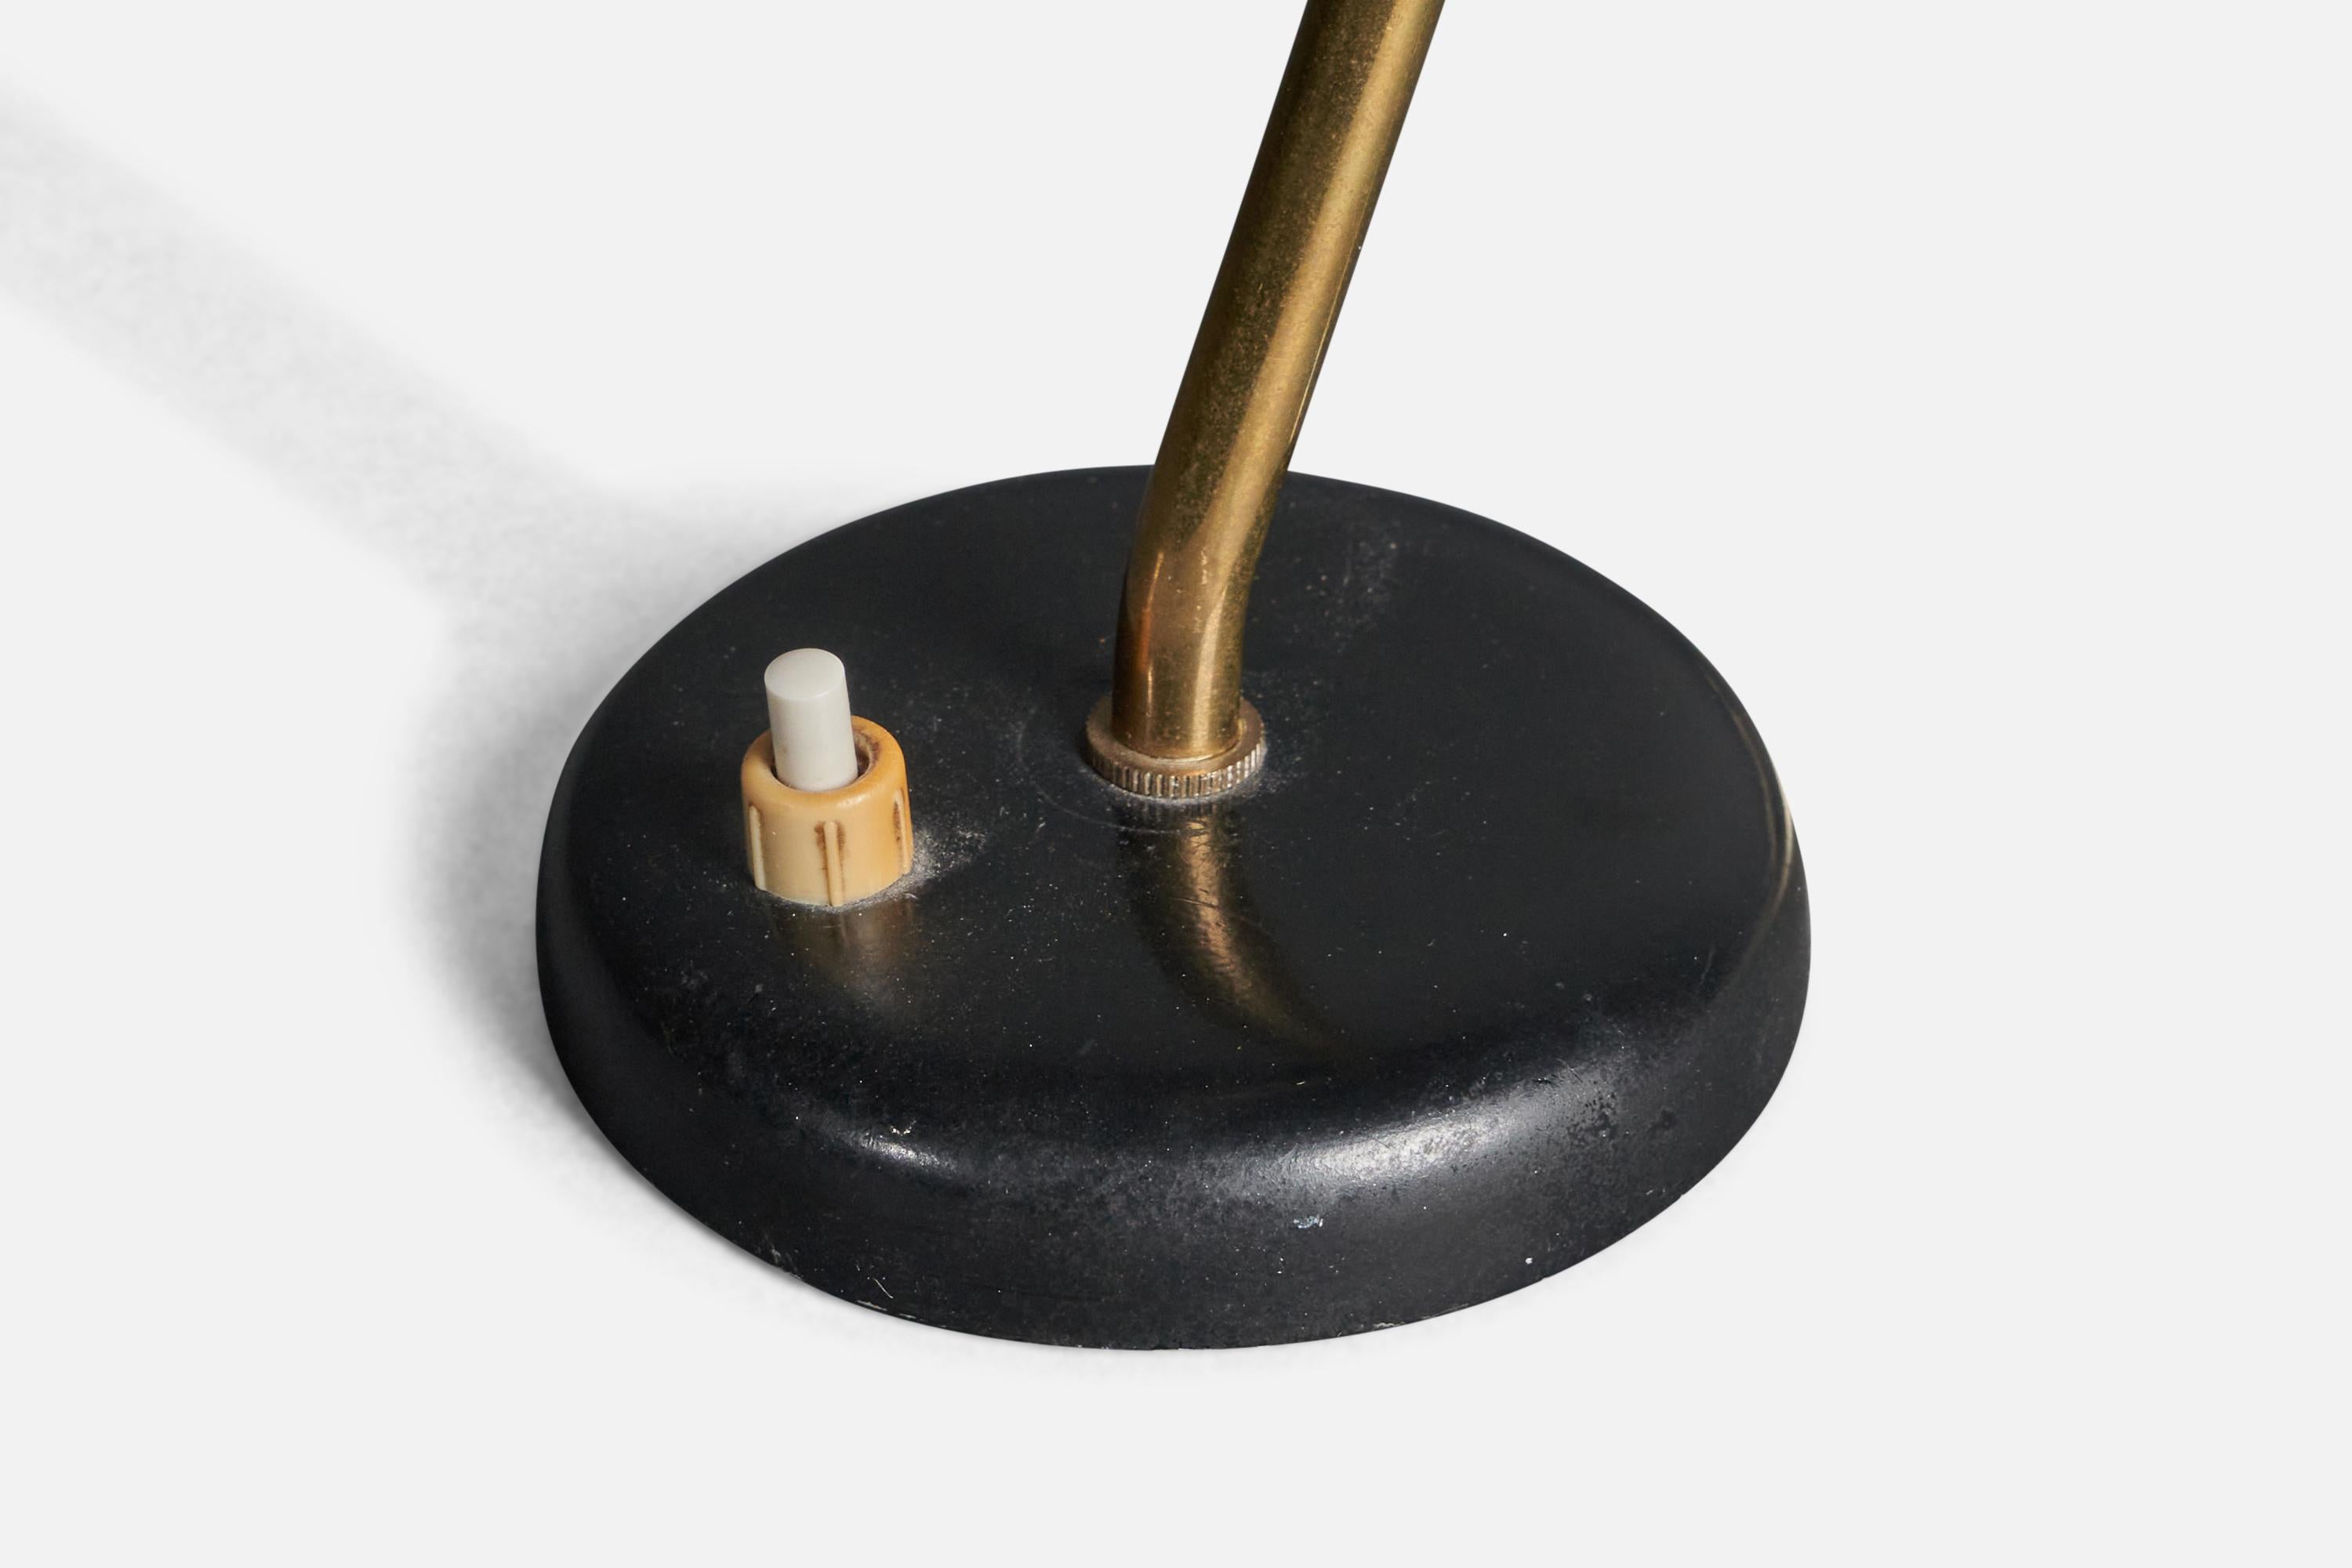 A table lamp / desk light, design is attributed to Svend Aage Holm SÃ¸rensen, Denmark, 1950s. Adjustable screen, original black lacquer.

Other designers of the period include Paavo Tynell, Serge Mouille, Josef Frank, Angelo Lelii, and Lisa